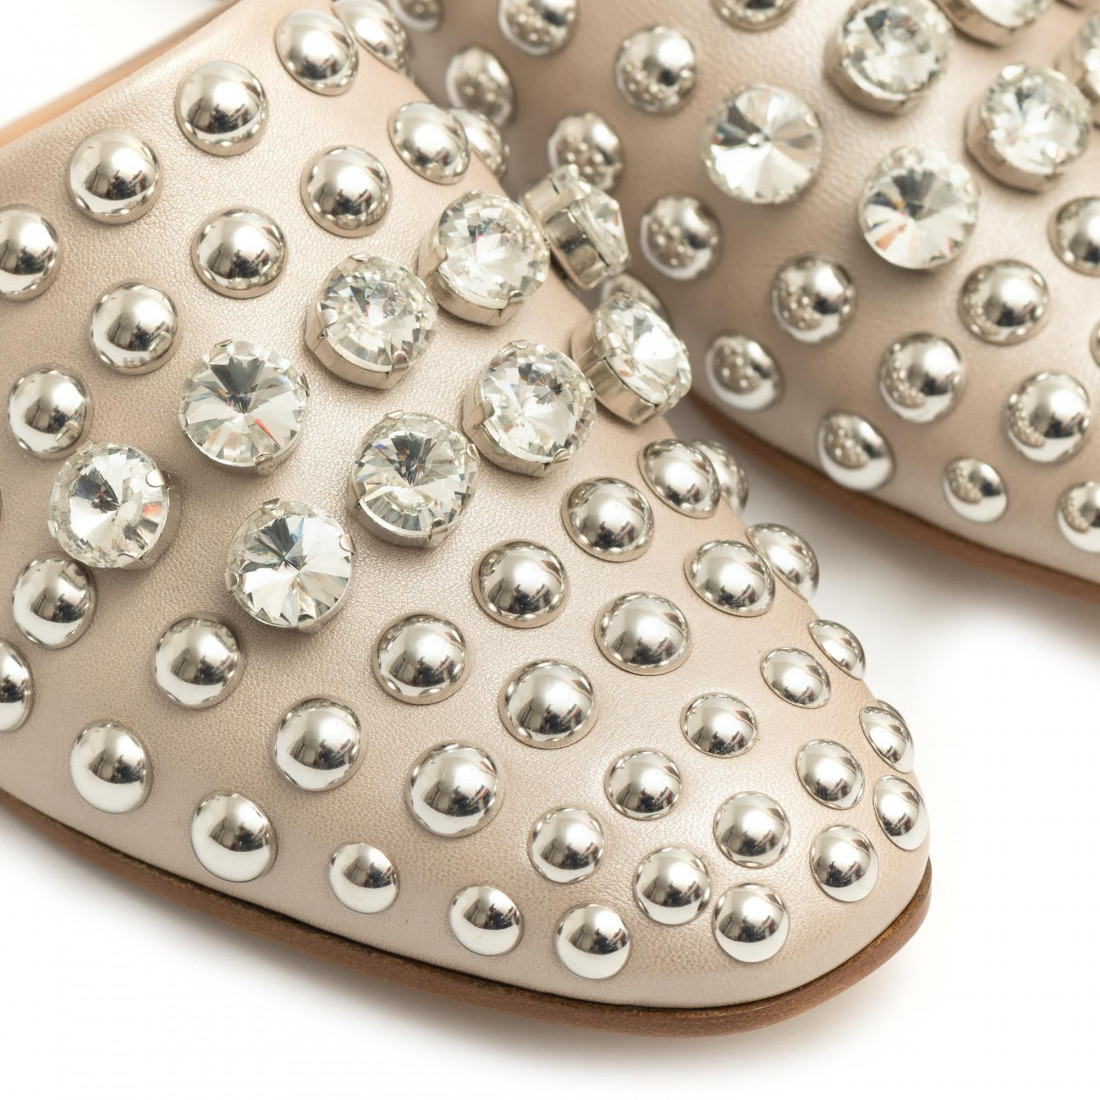 YLA sabot in ice leather with studs and swarovski